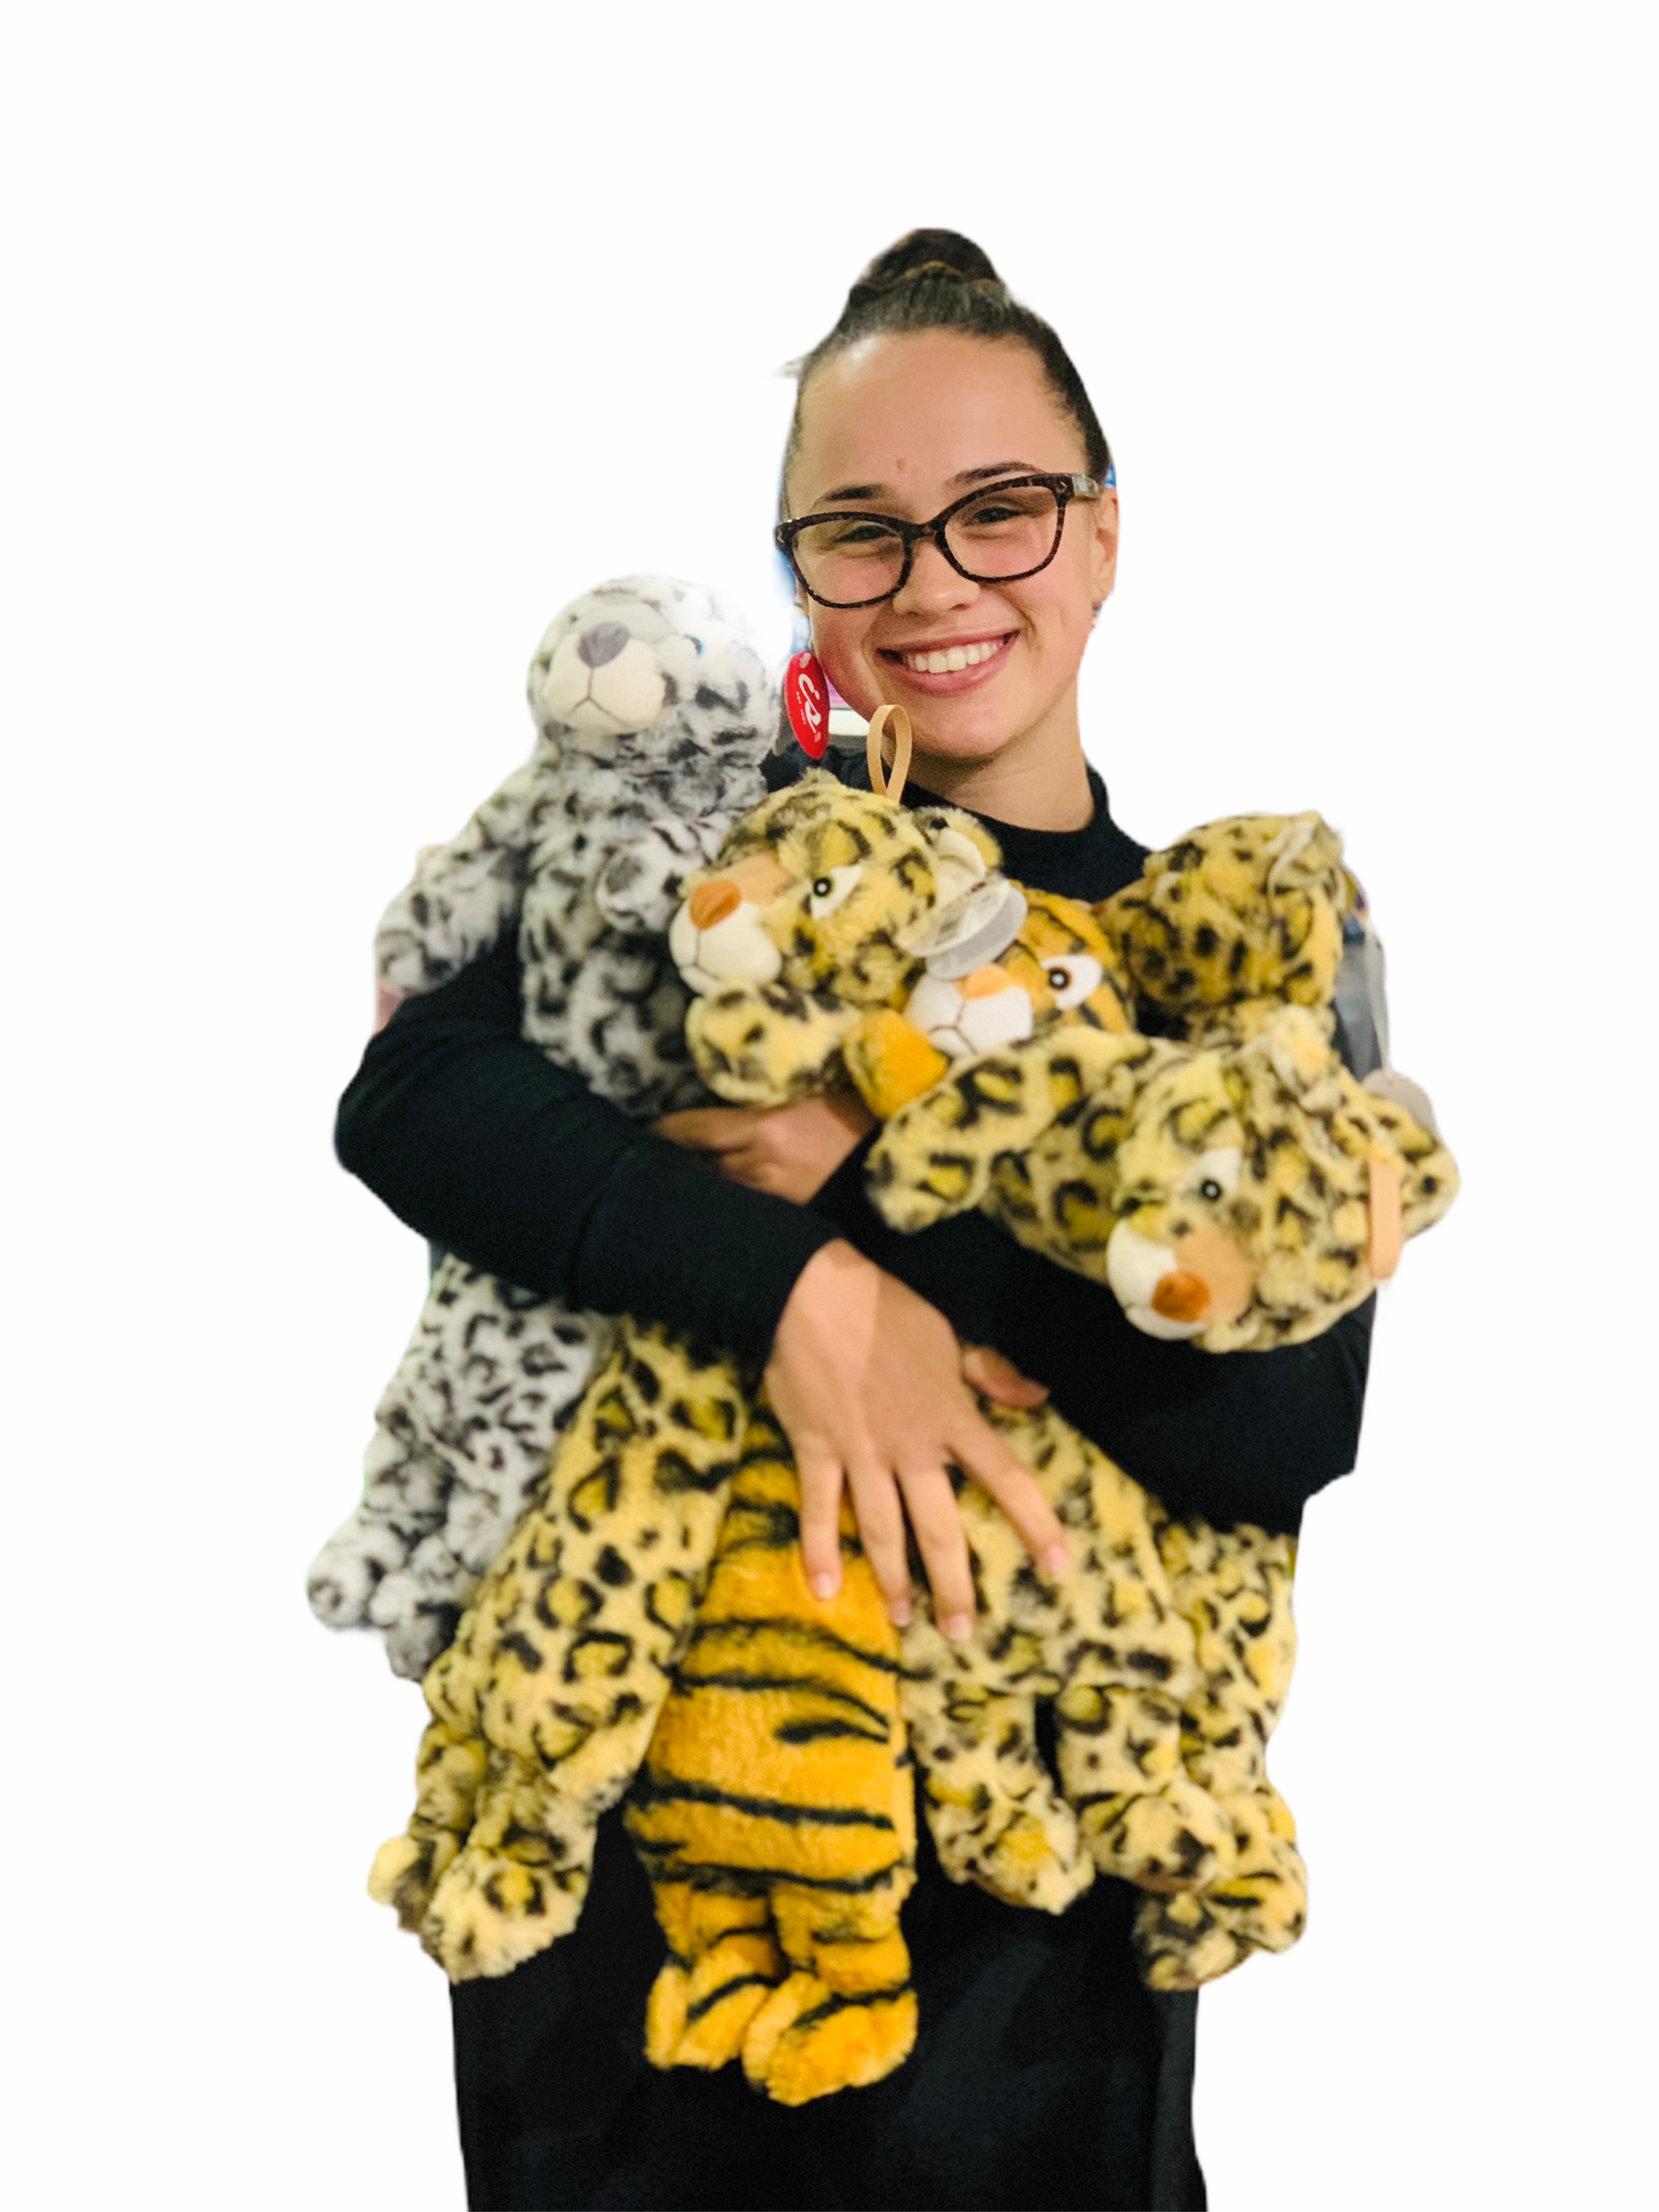 Girl with glasses smiling holding 3 2kg weighted lap cats